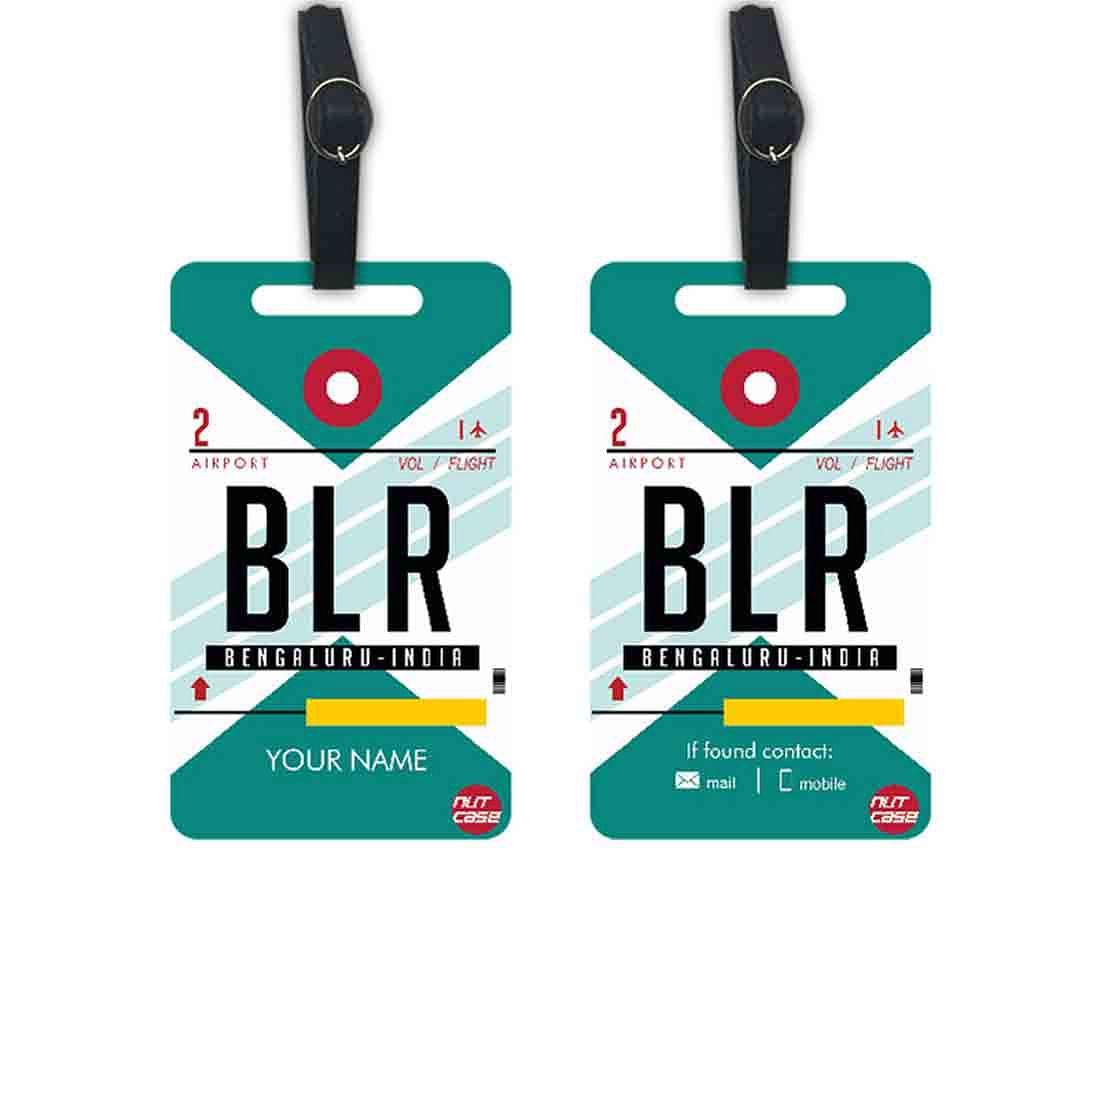 Customized Travel Luggage Tag Gift Set - Add your Name - Set of 2 Nutcase